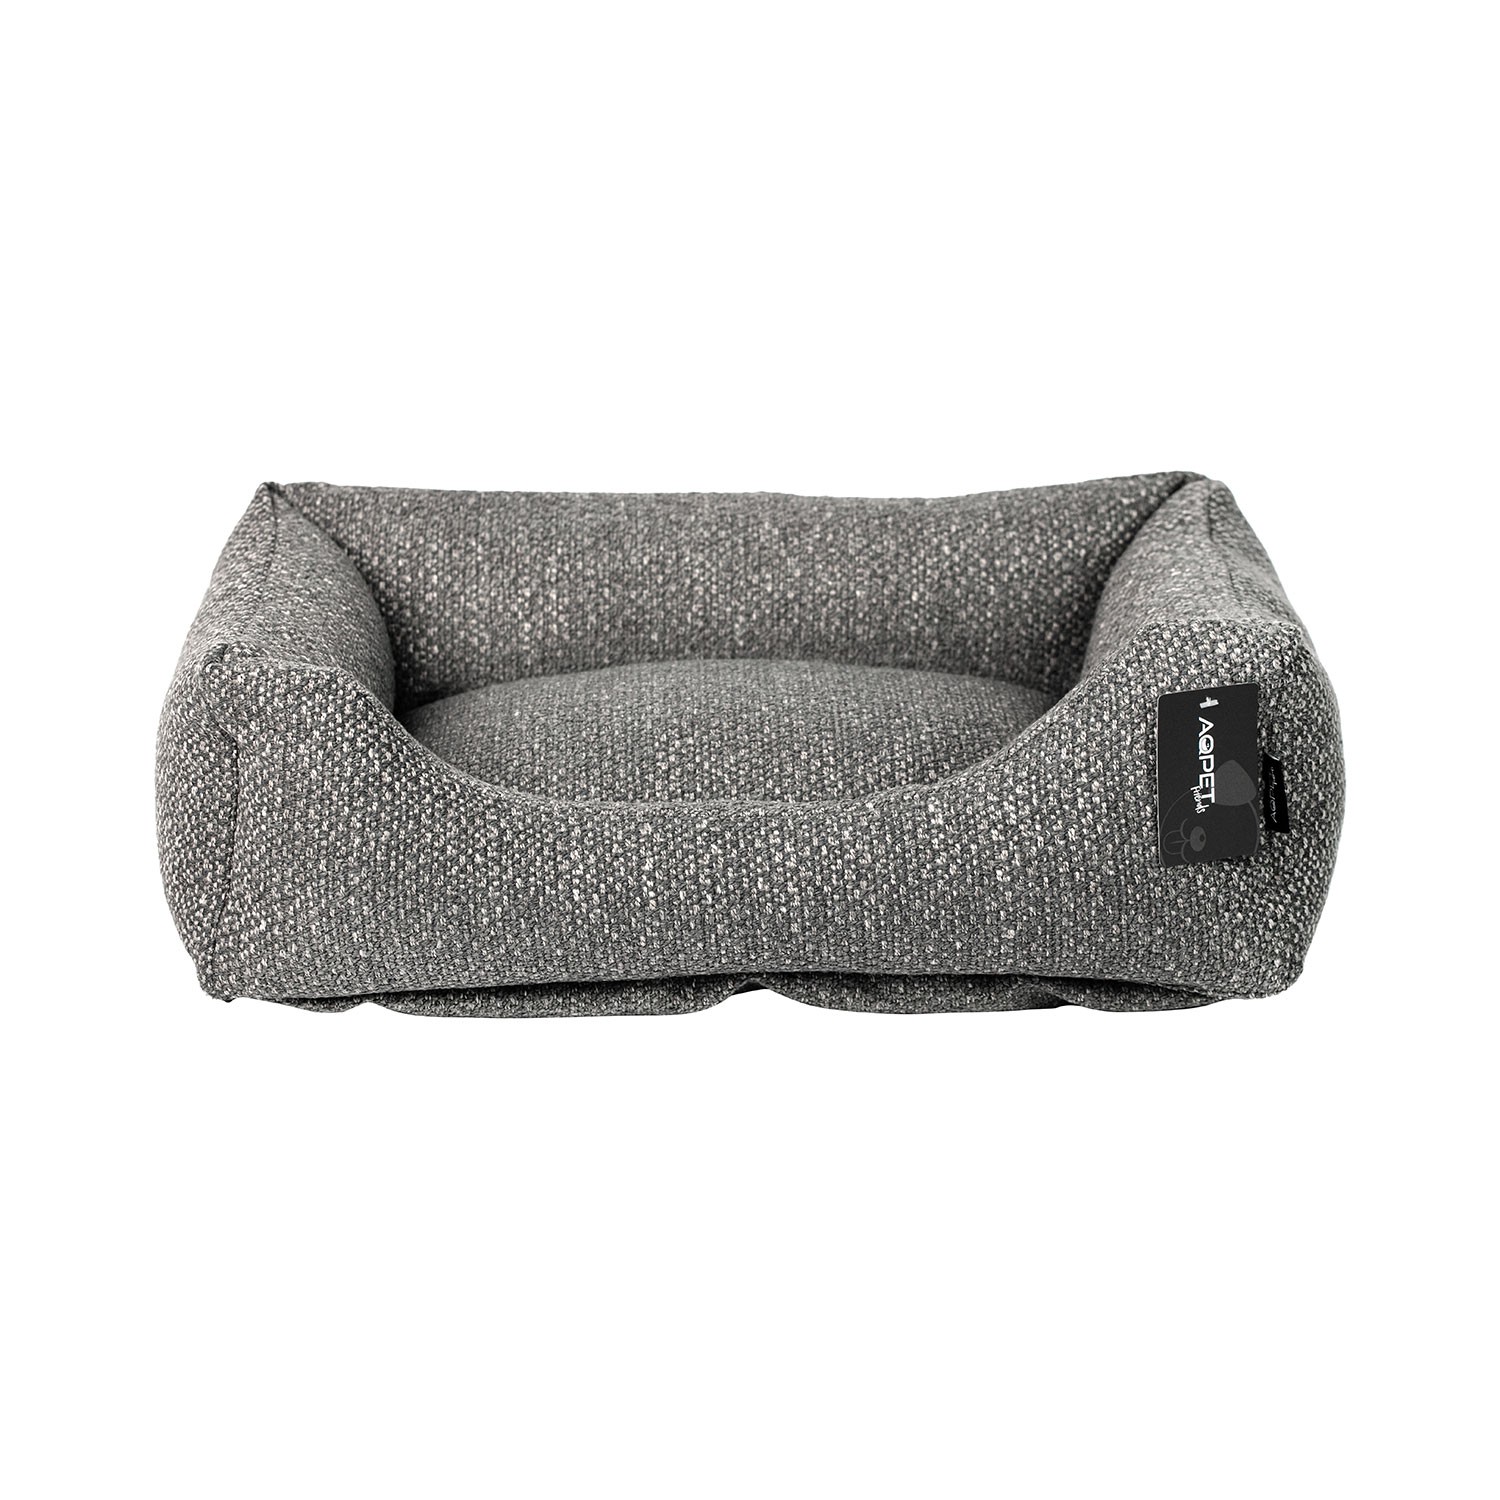 Cushy pet OBSIDIAN BED dog bed made with recycled fabric